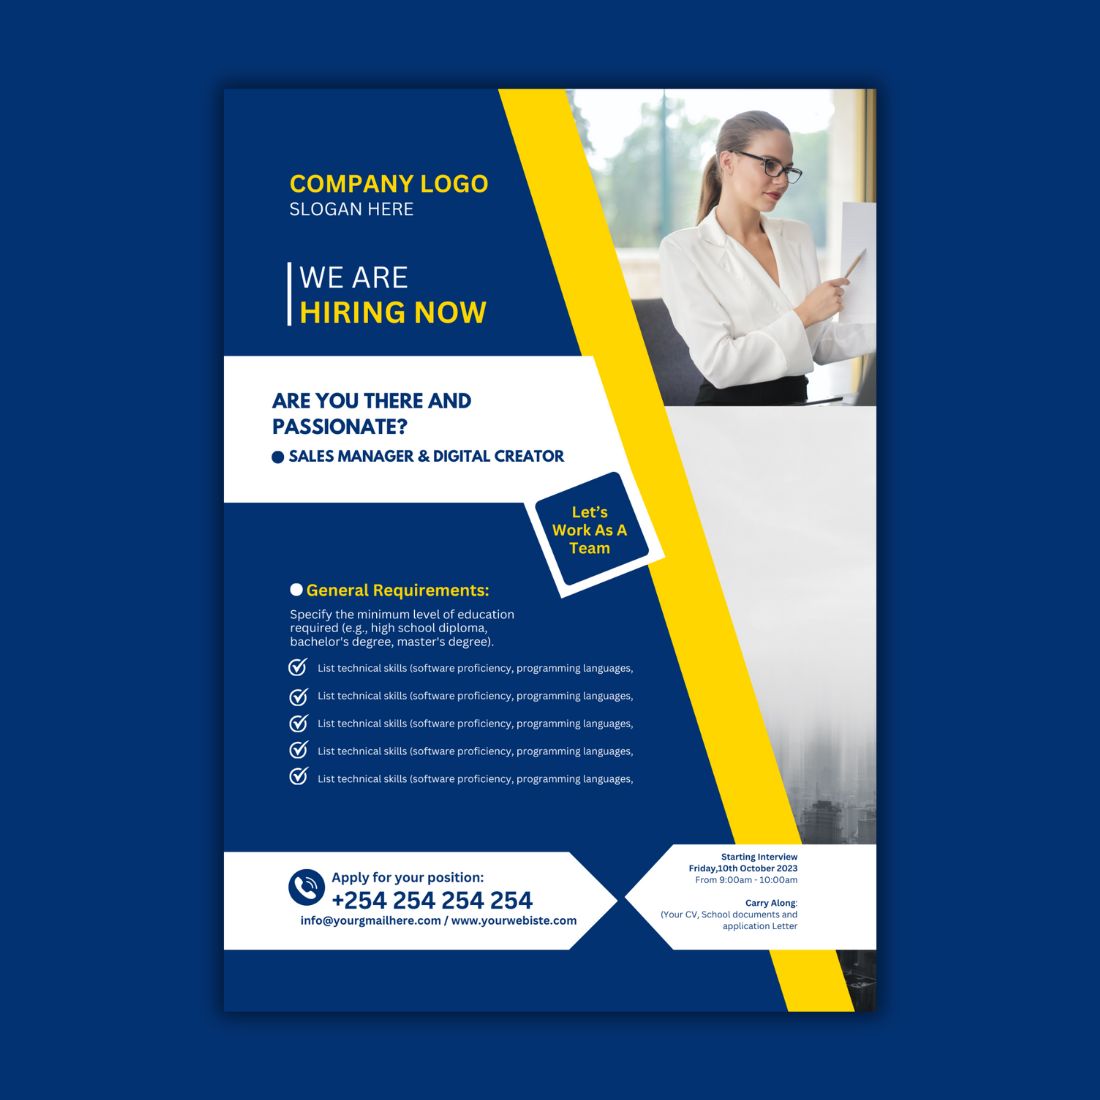 Hiring Flyer Design Template cover image.